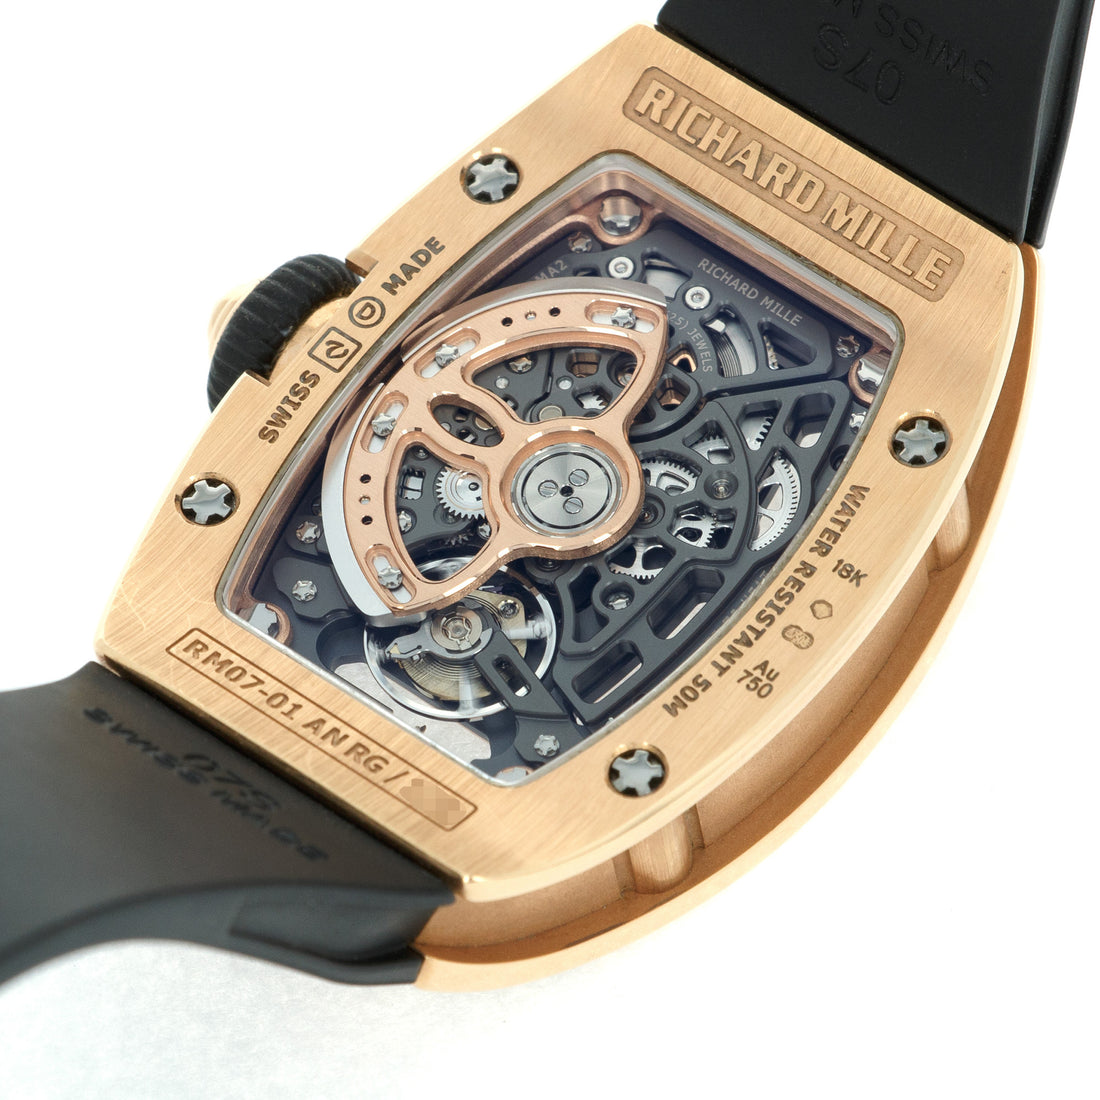 Richard Mille Rose Gold Automatic RM07